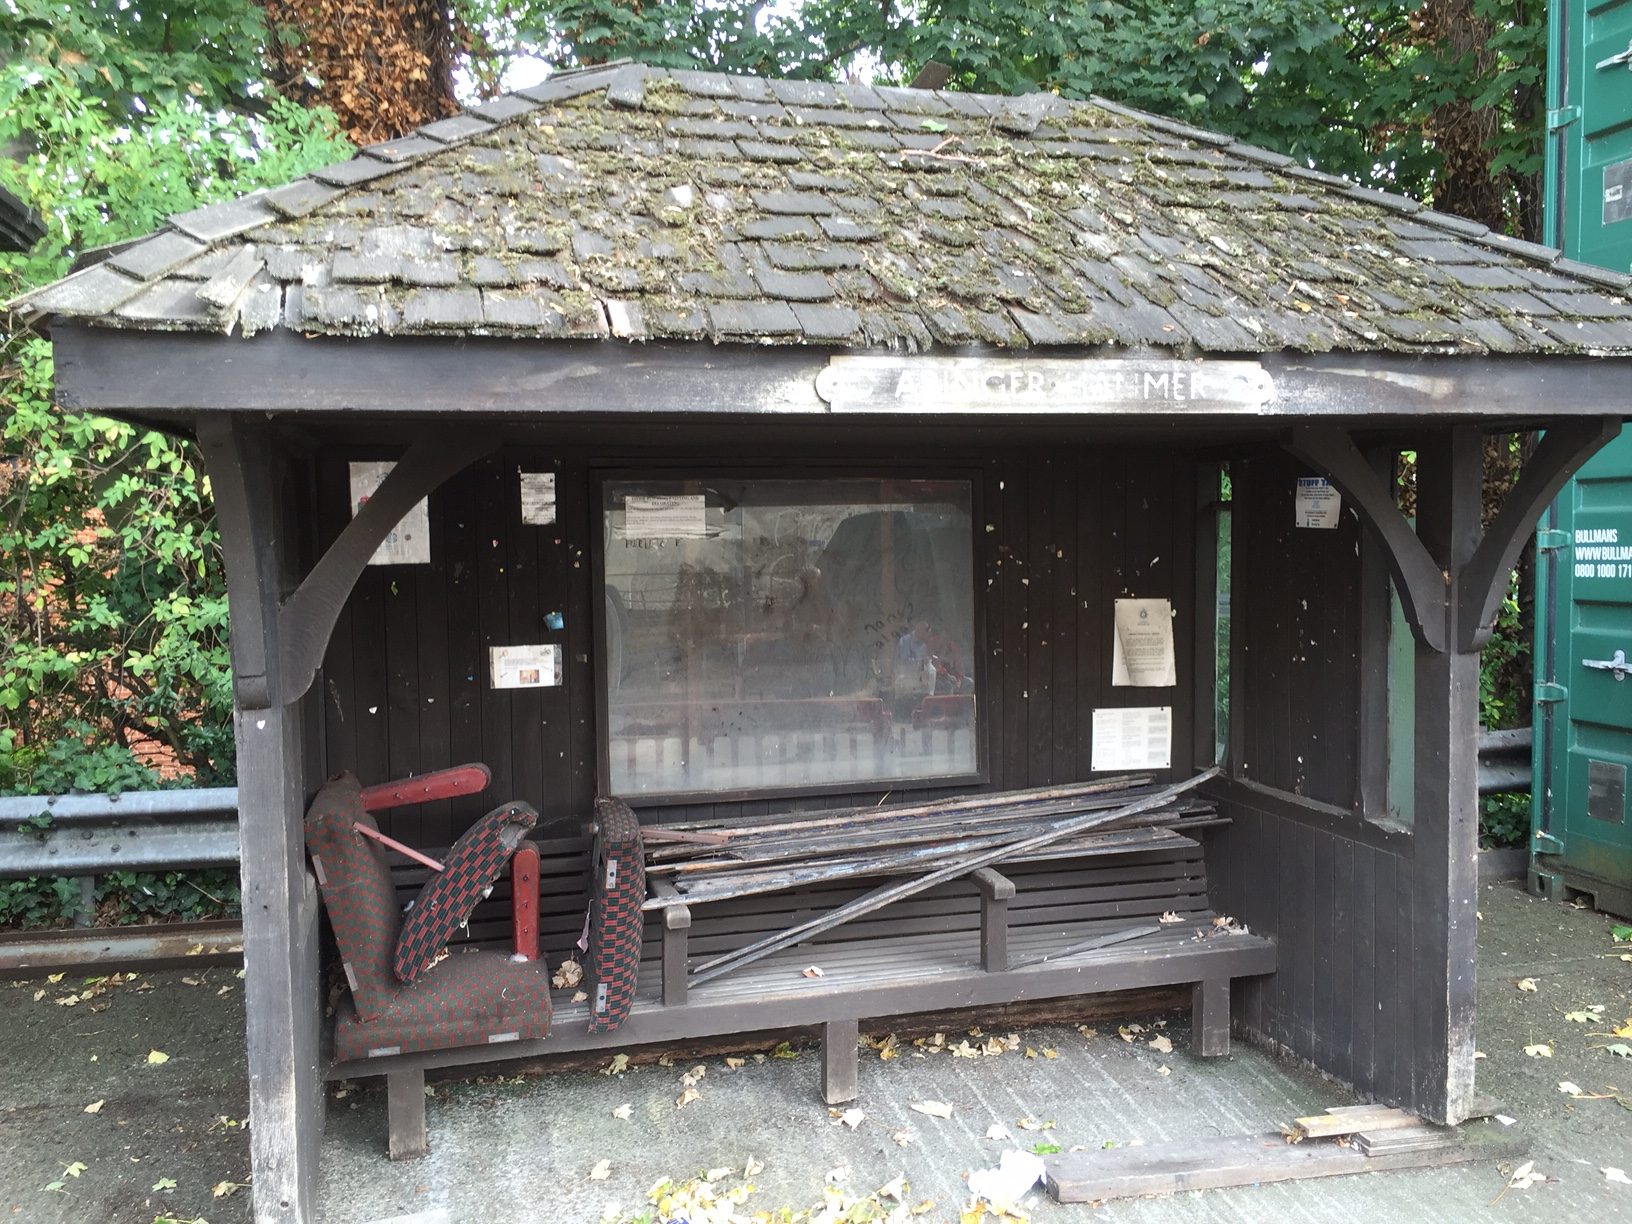 London Transport Museum: Decrepit bus shelter from Abinger Hammer, Surrey. New one there thankfully. Still boring.